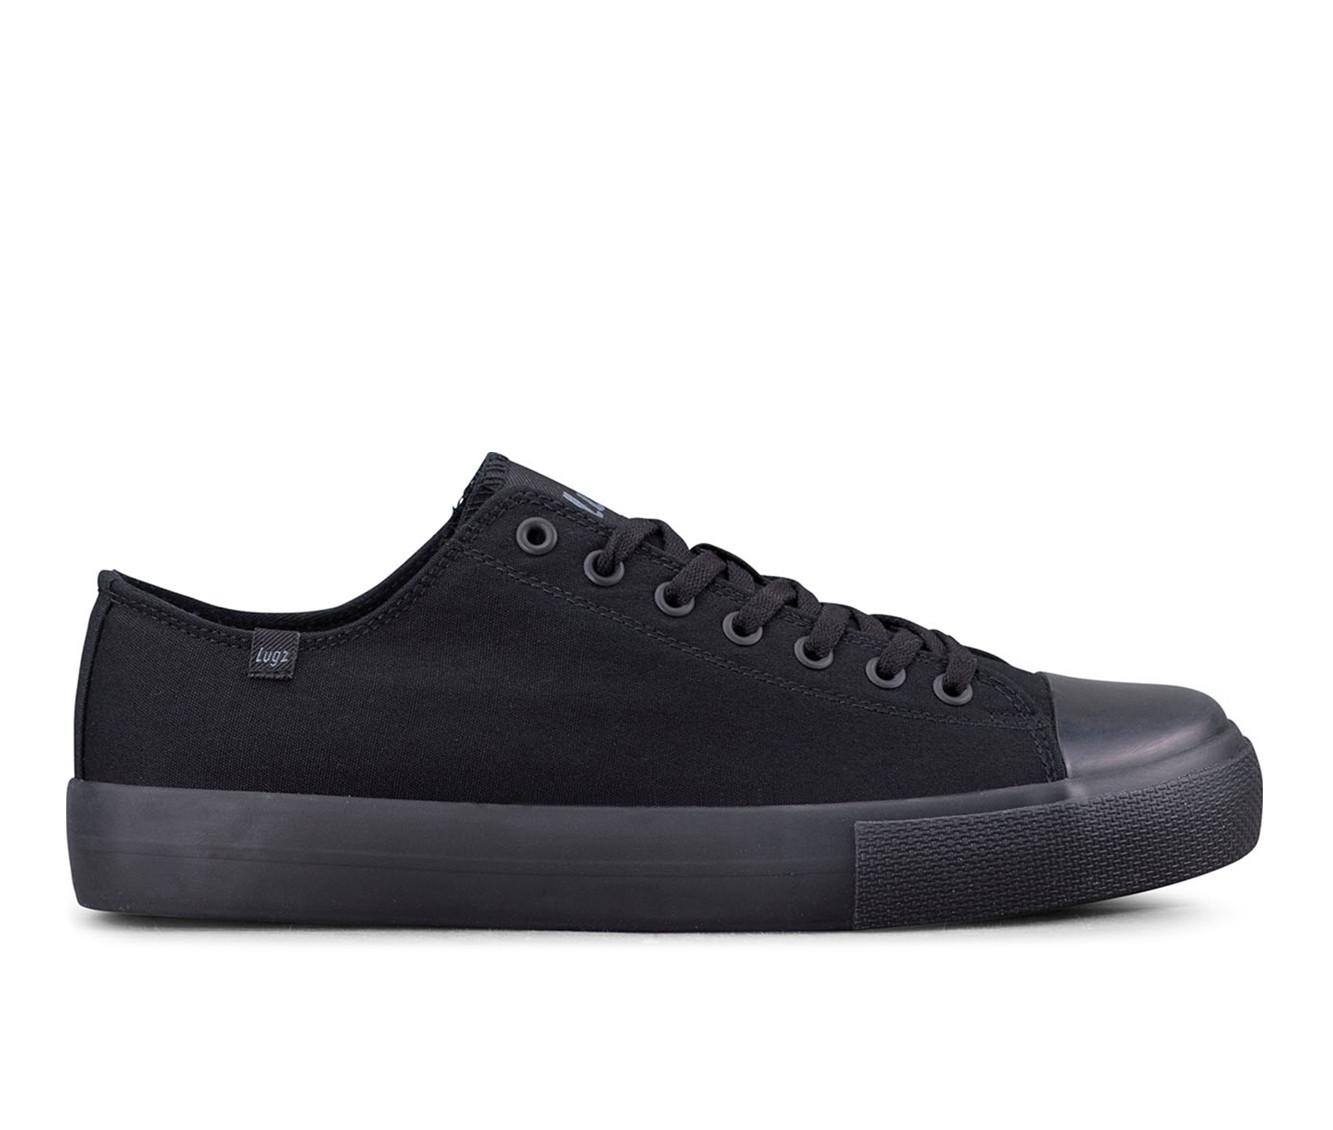 Men's Lugz Stagger Lo Wide Casual Shoes